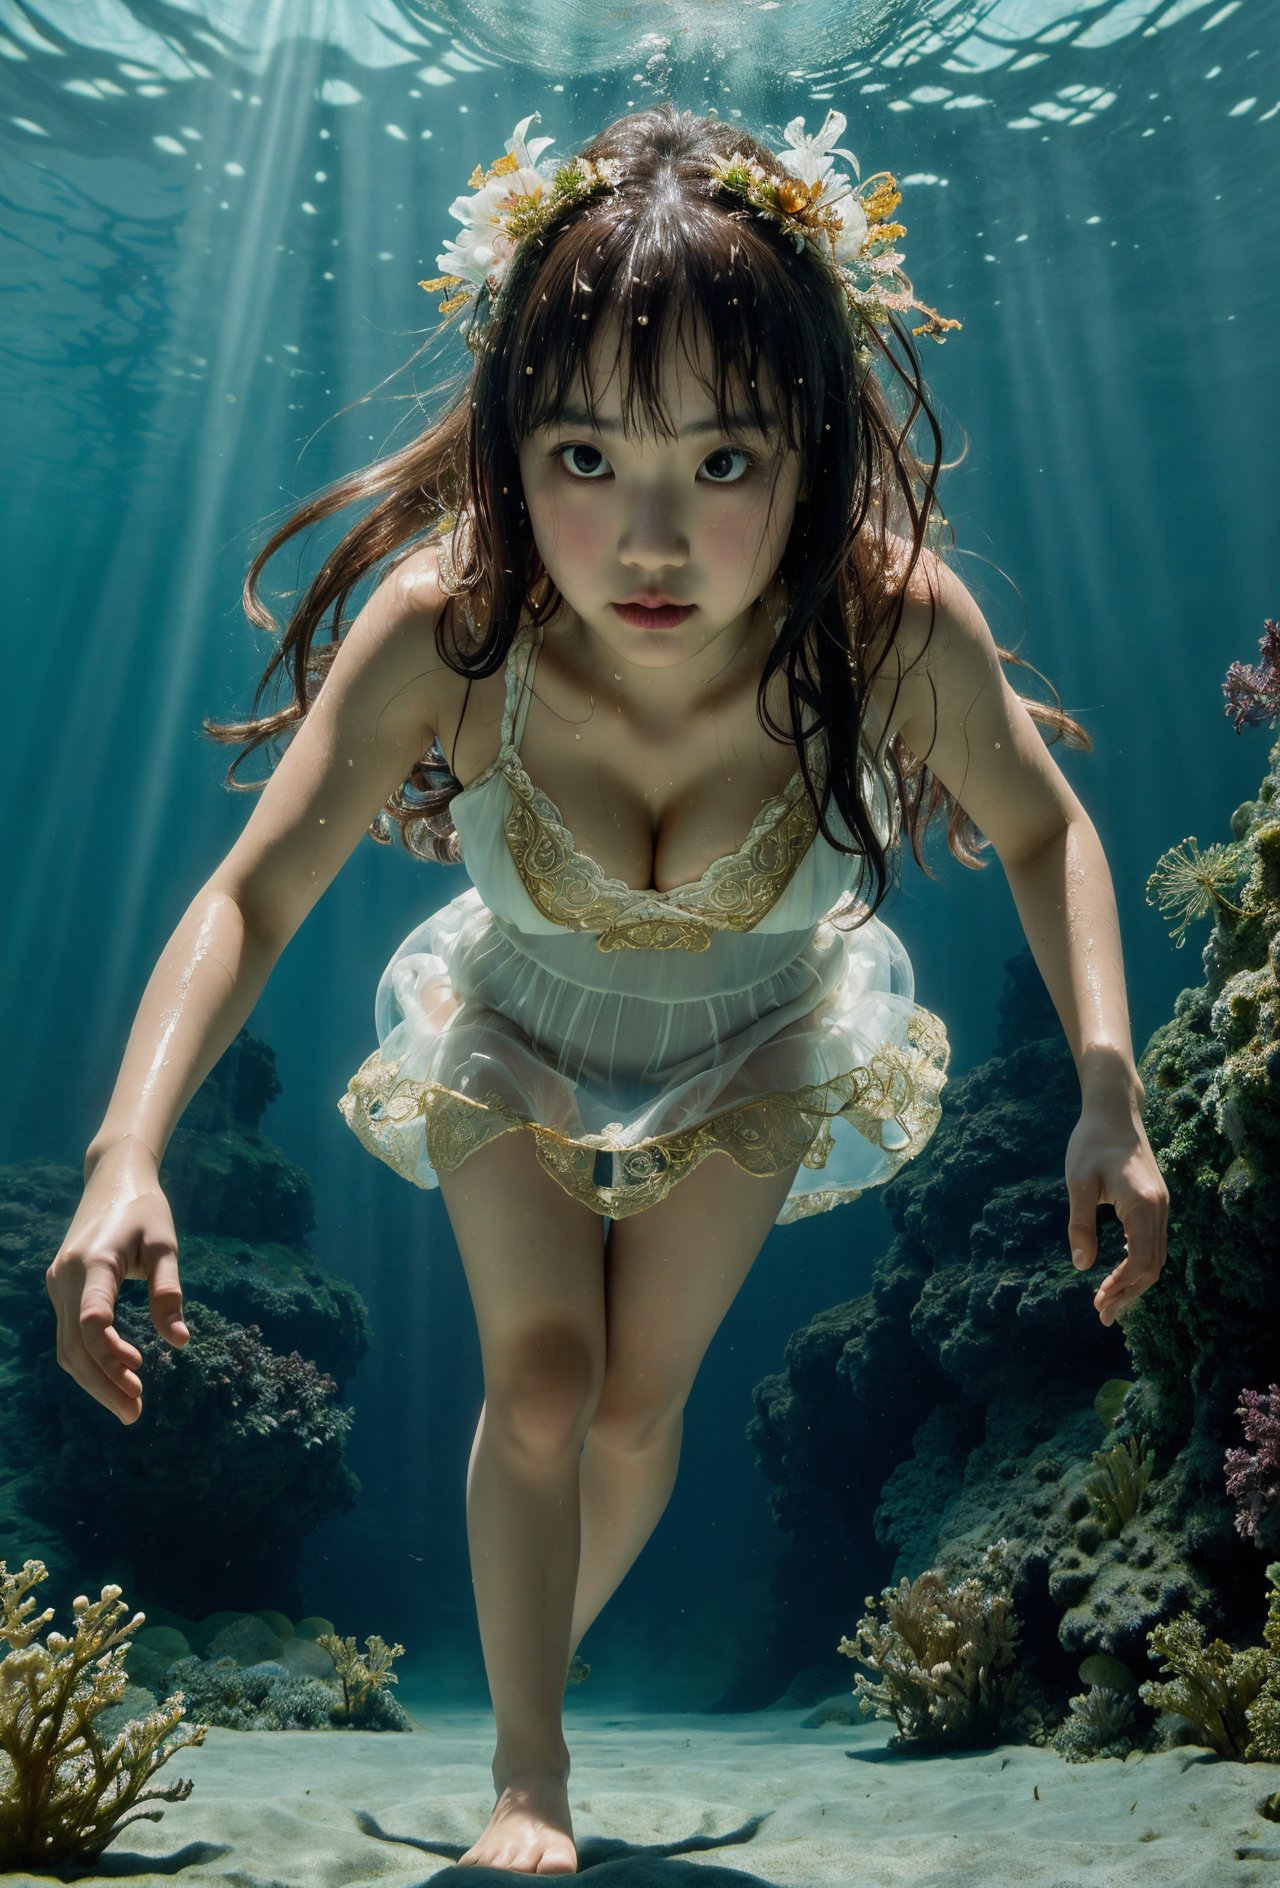 best quality, masterpiece, raw photo of a 1girl diving down underwater which in wet floral lace see-through long white dress which often for ornate details and gold jewelry, floating long brown hair, shy cute face, far side high key light, professional cinematic, hard shadow, soft bokeh, professional photography, balanced contract, balanced exposure,  show cleavage, bare feet, show legs, diving:1.3 